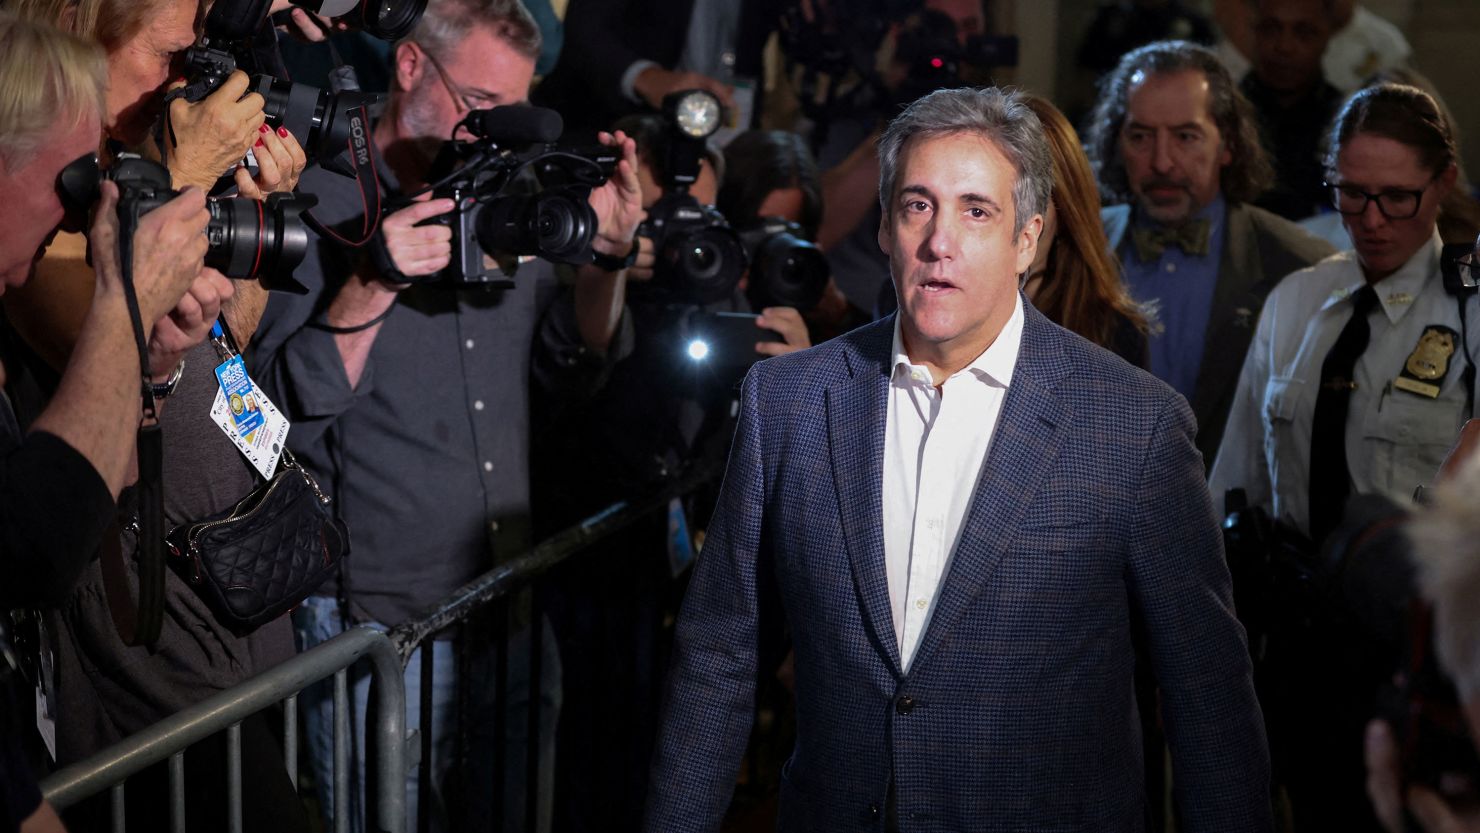 Michael Cohen attends the Trump Organization civil fraud trial on Tuesday, Oct. 24.   